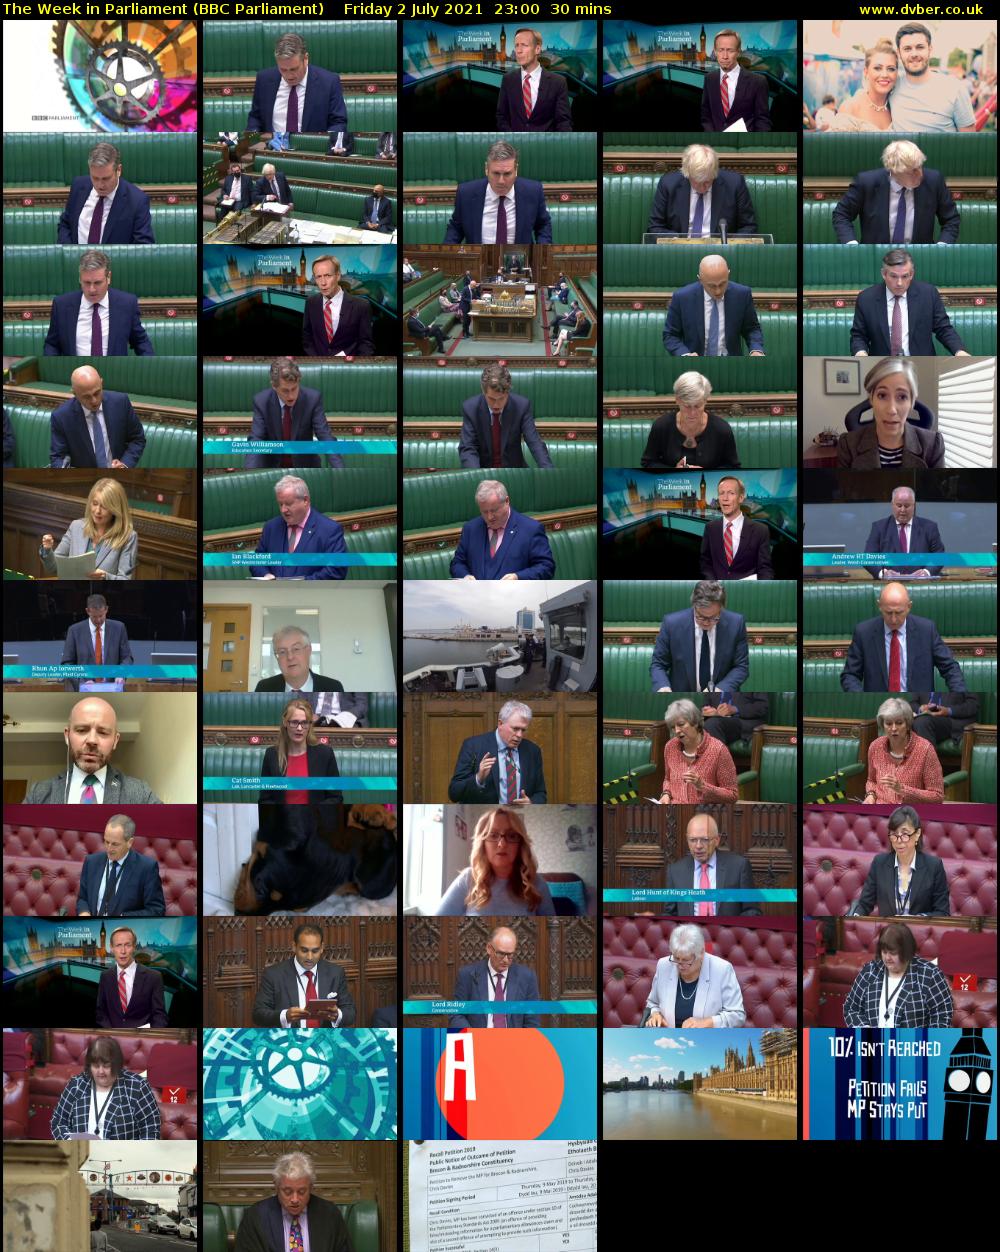 The Week in Parliament (BBC Parliament) Friday 2 July 2021 23:00 - 23:30